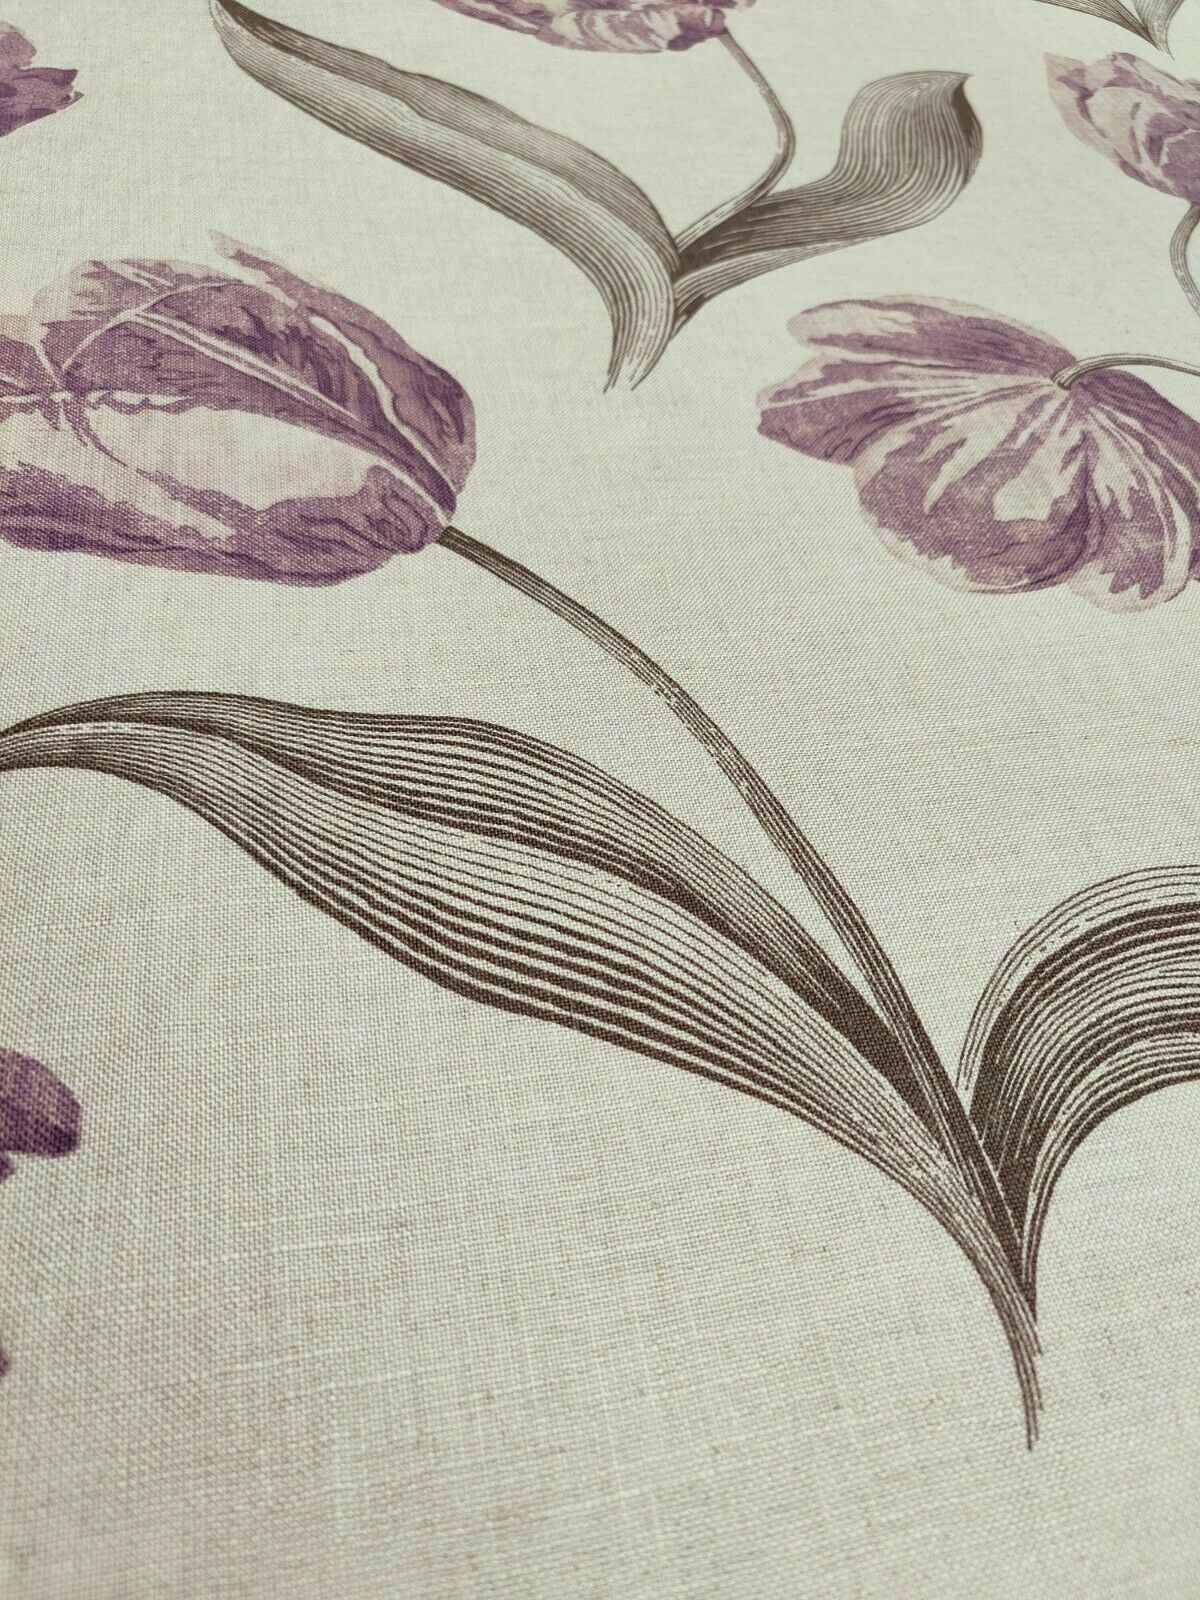 Harlequin Liana Aubergine Curtain Upholstery Fabric By The Metre